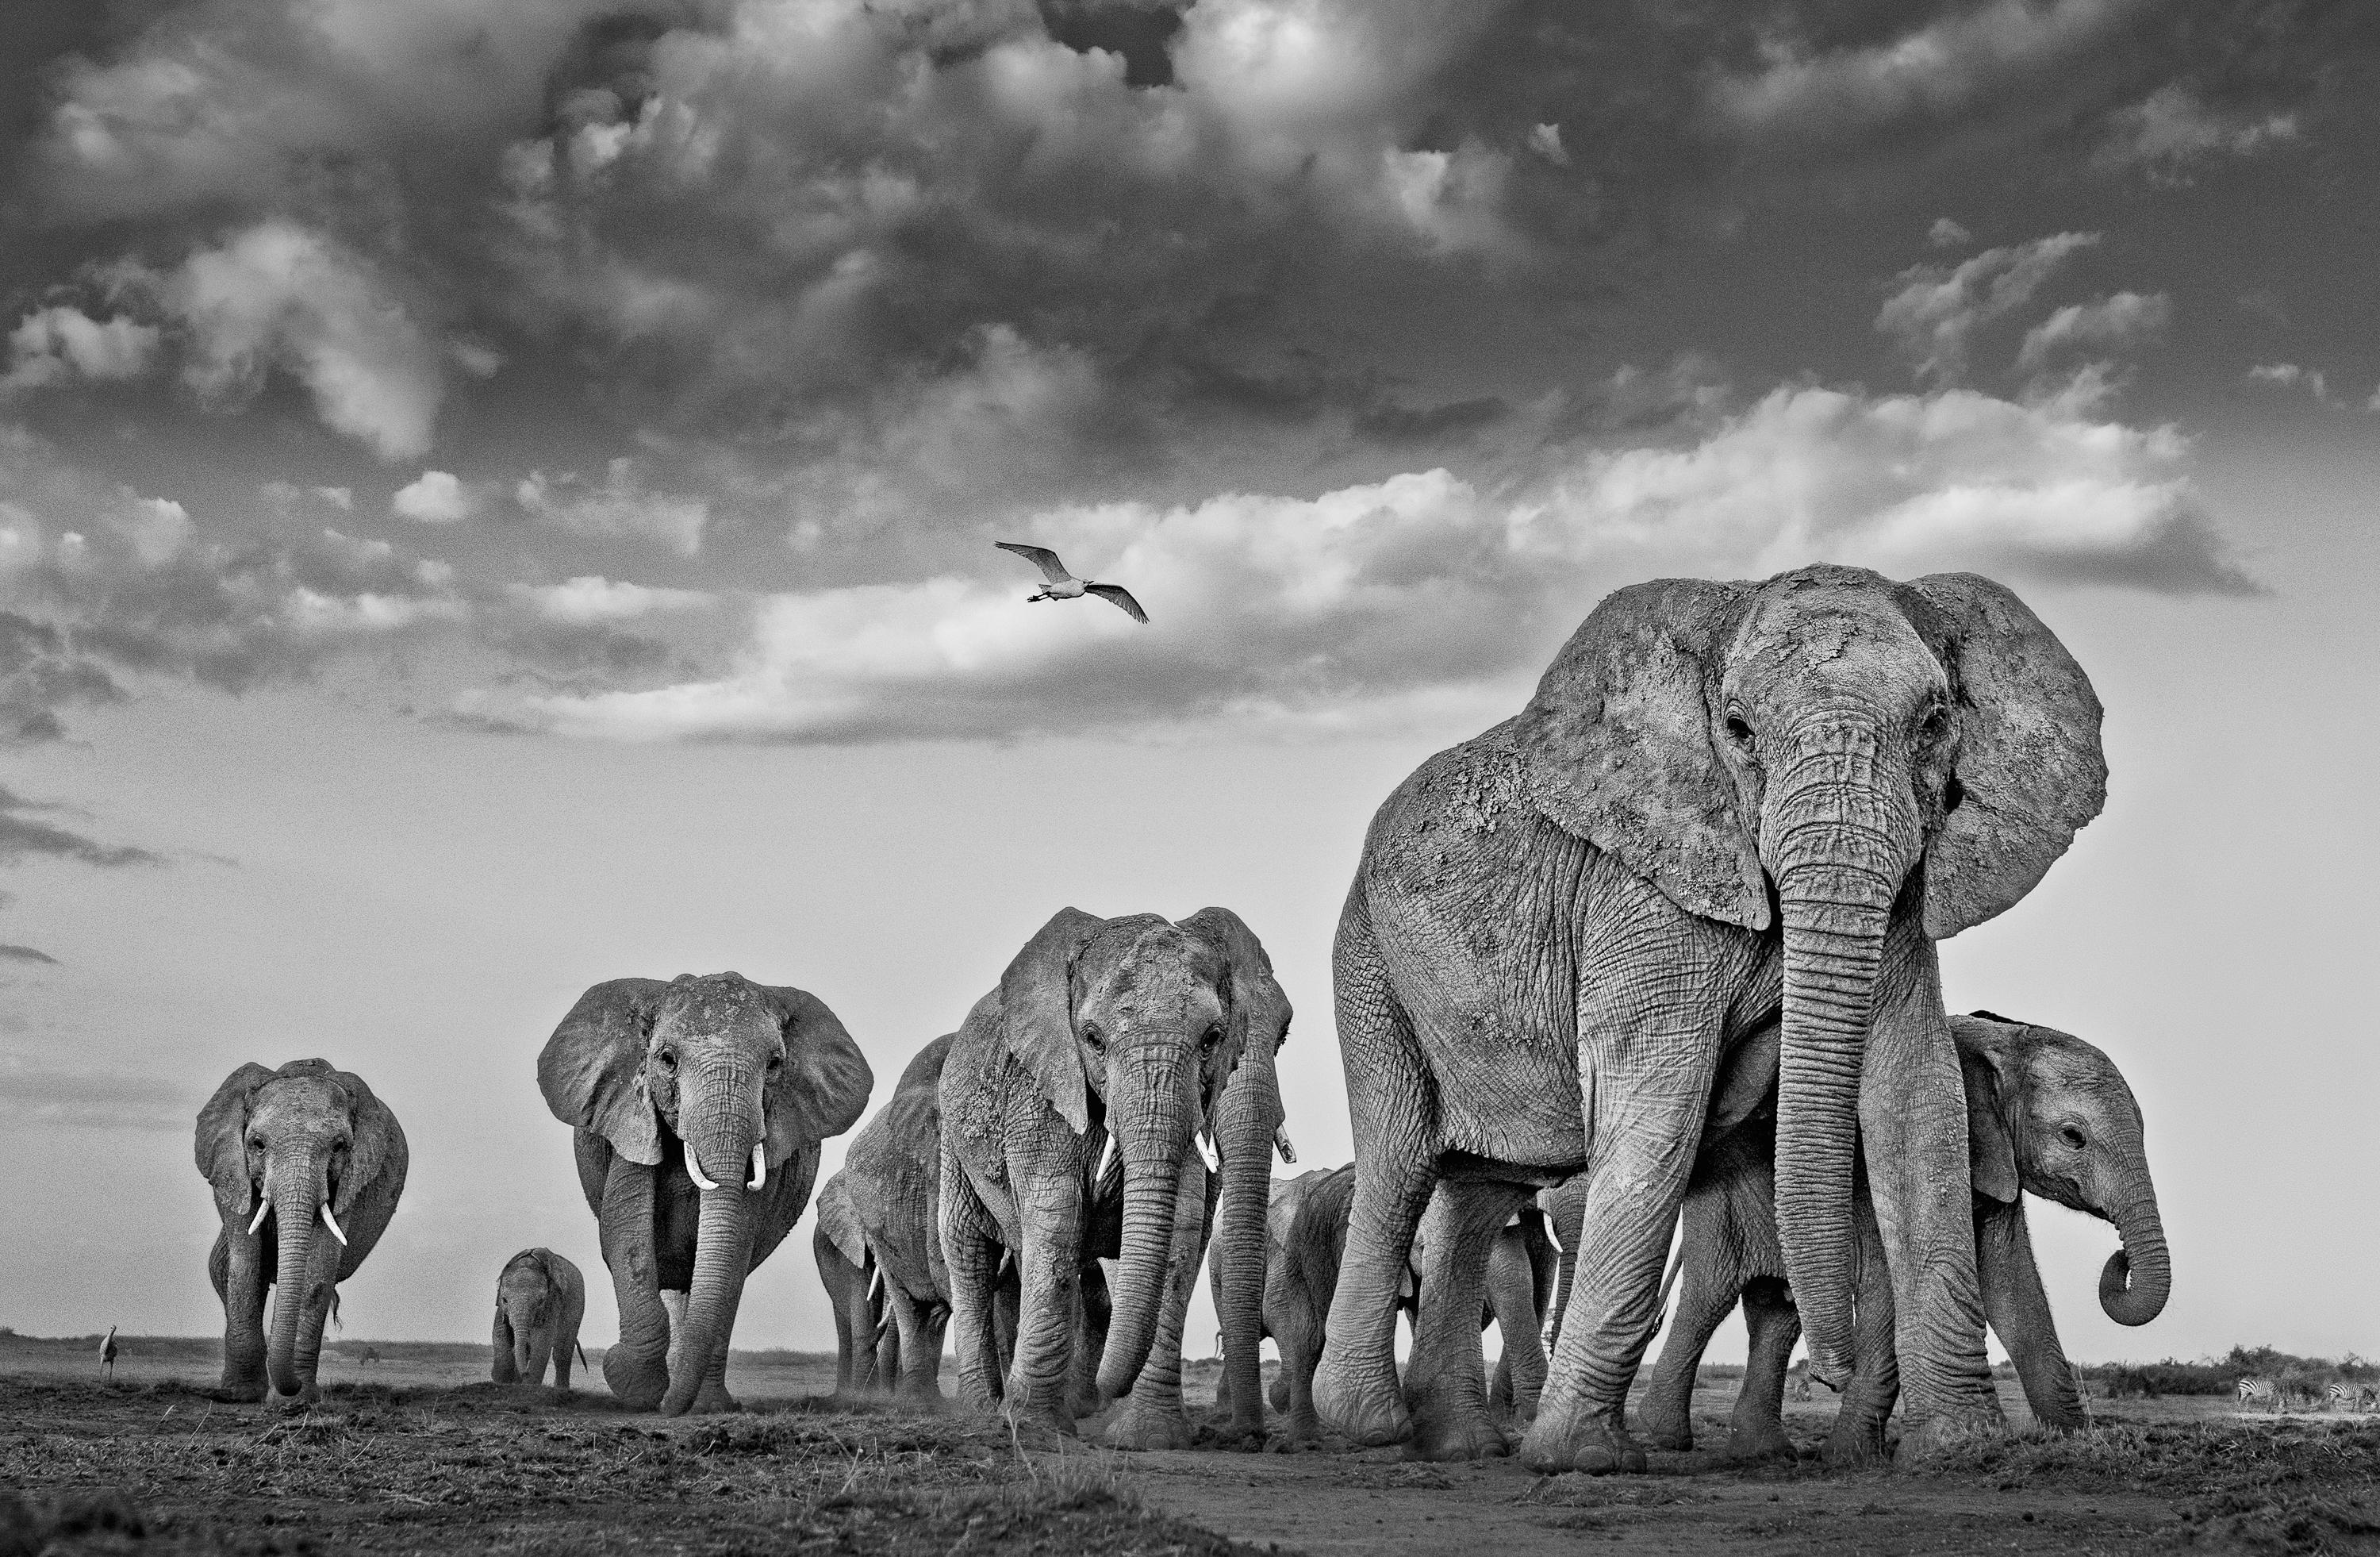 James Lewin - The Elephants and the Egret, Photography 2021